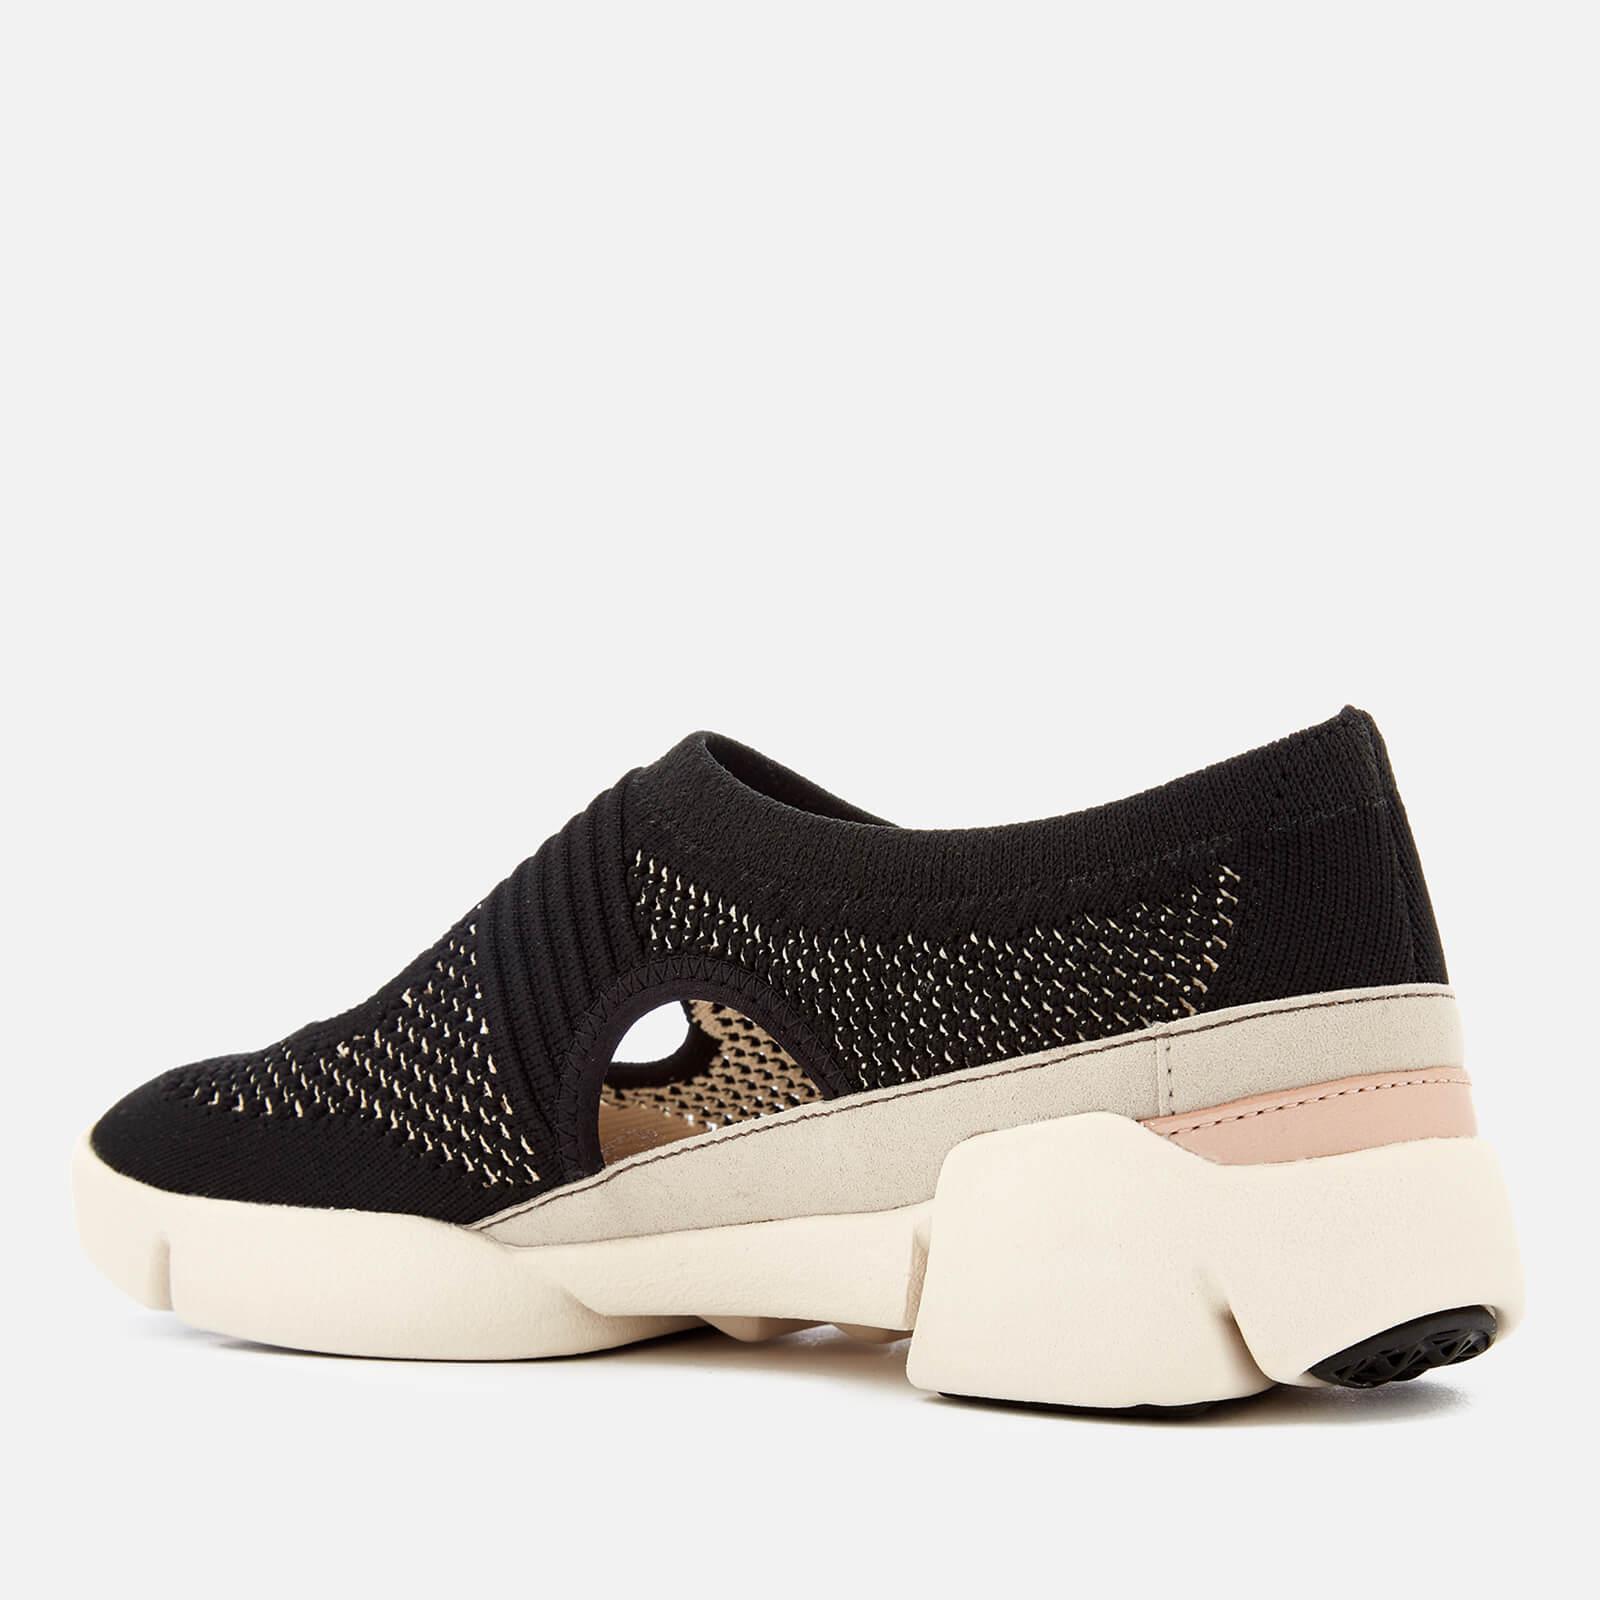 Clarks Rubber Tri Blossom Knit Flats in Black | Lyst